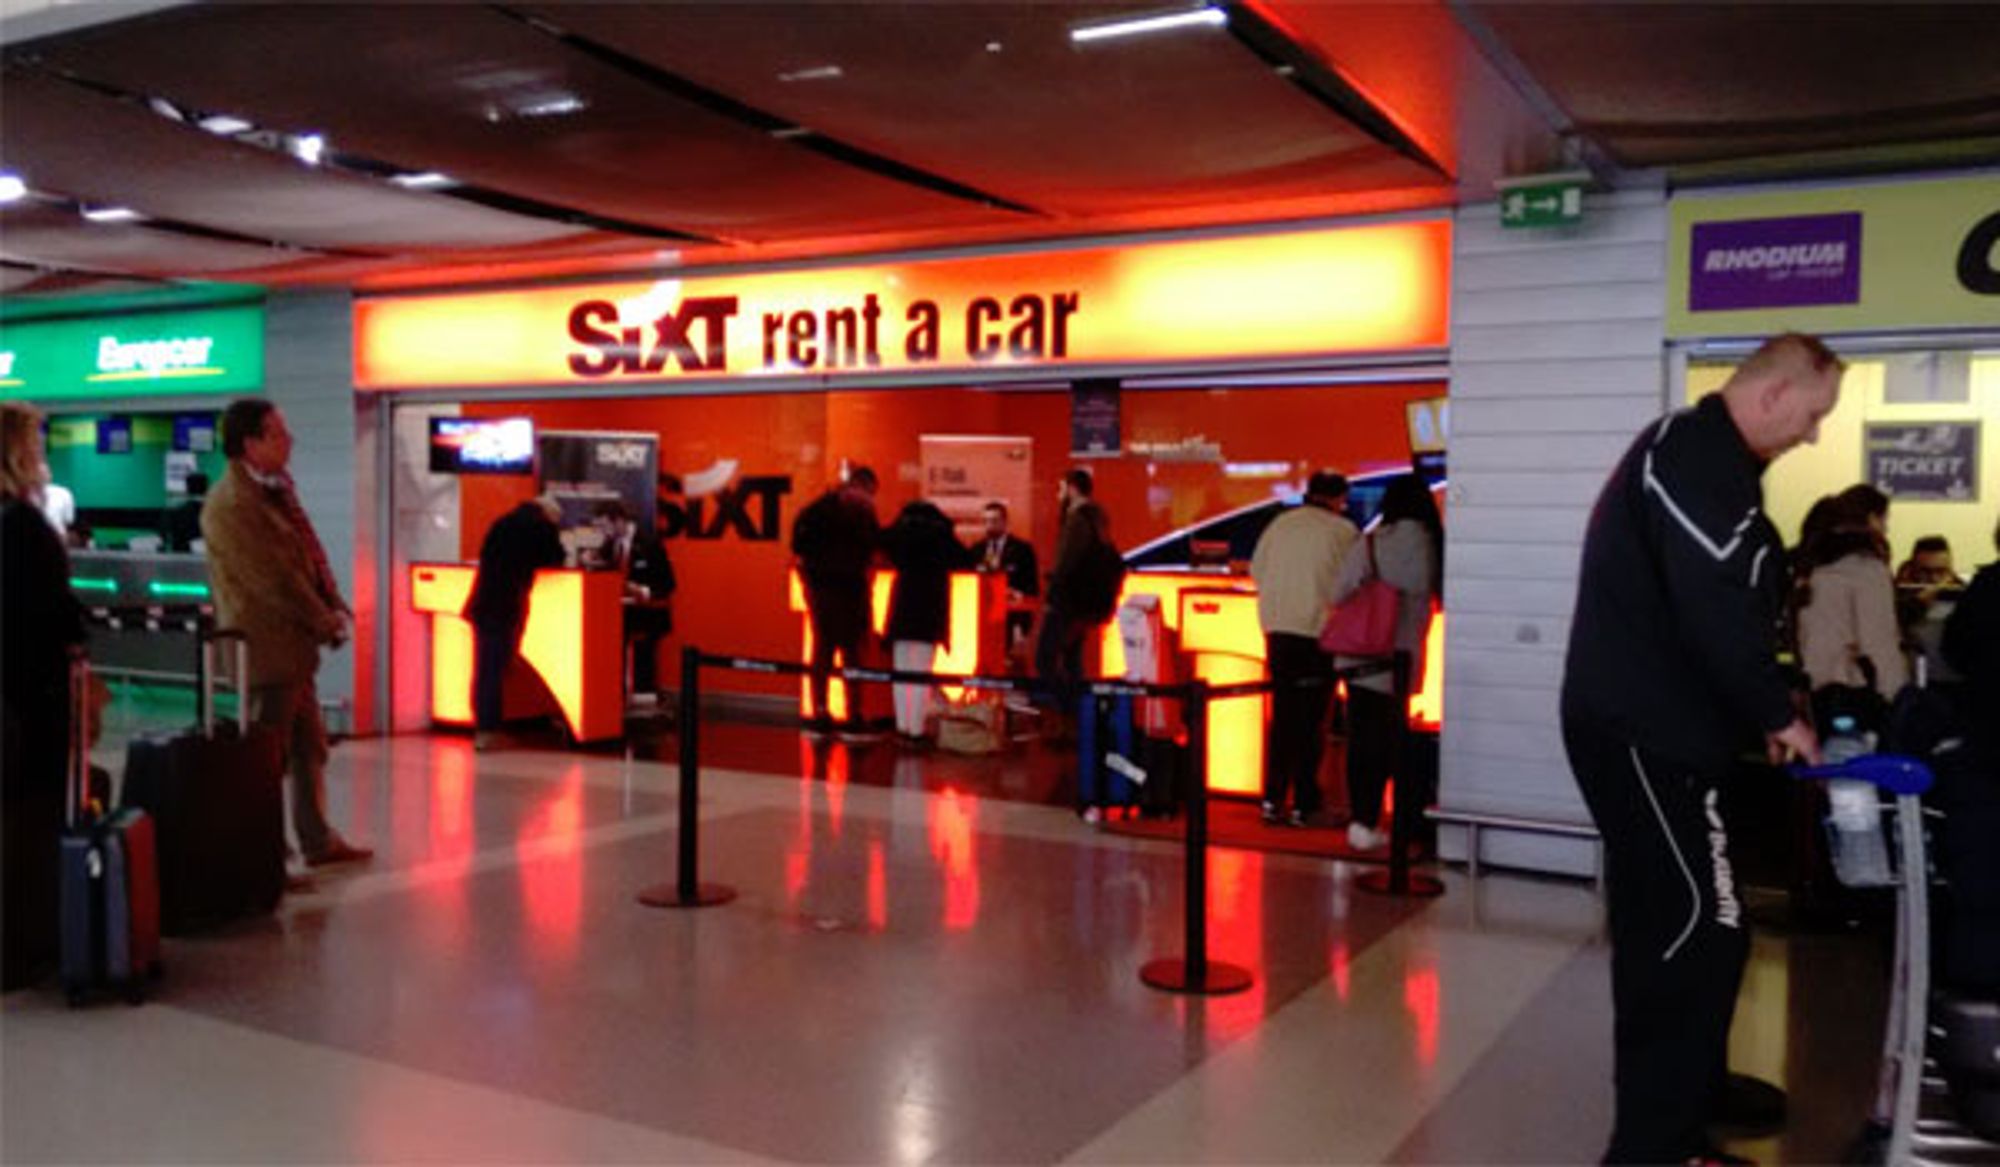 Photo of the Sixt Rent A Car counter in the Lisbon airport.